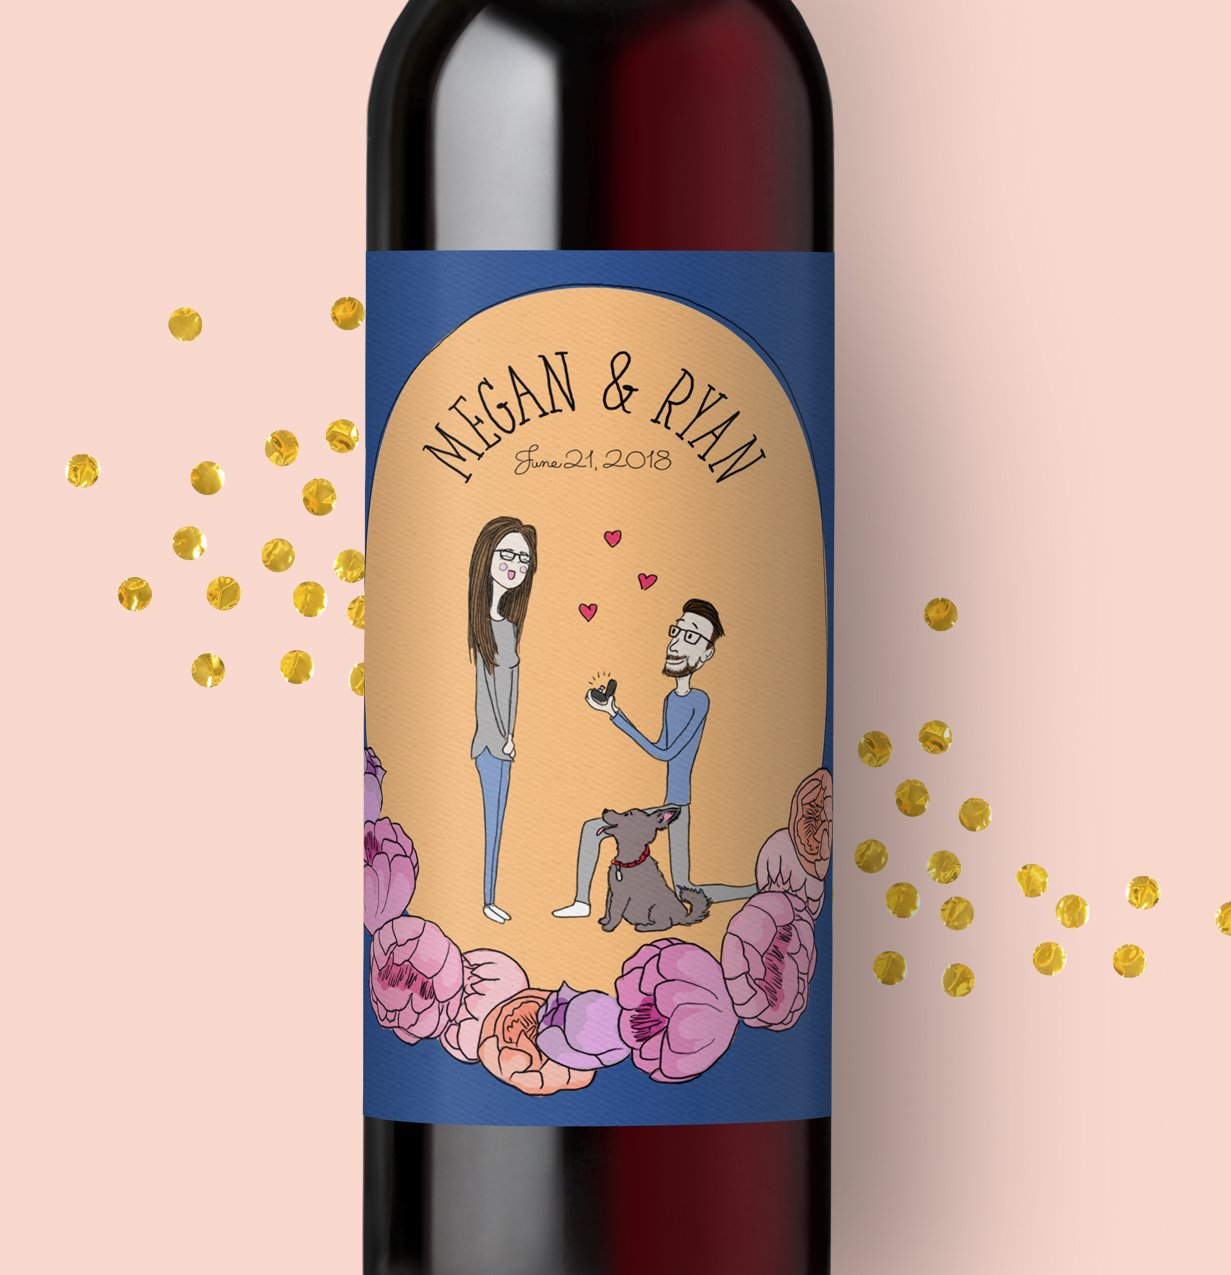 Unique wedding favor; a wine label made with a caricature wedding couple.